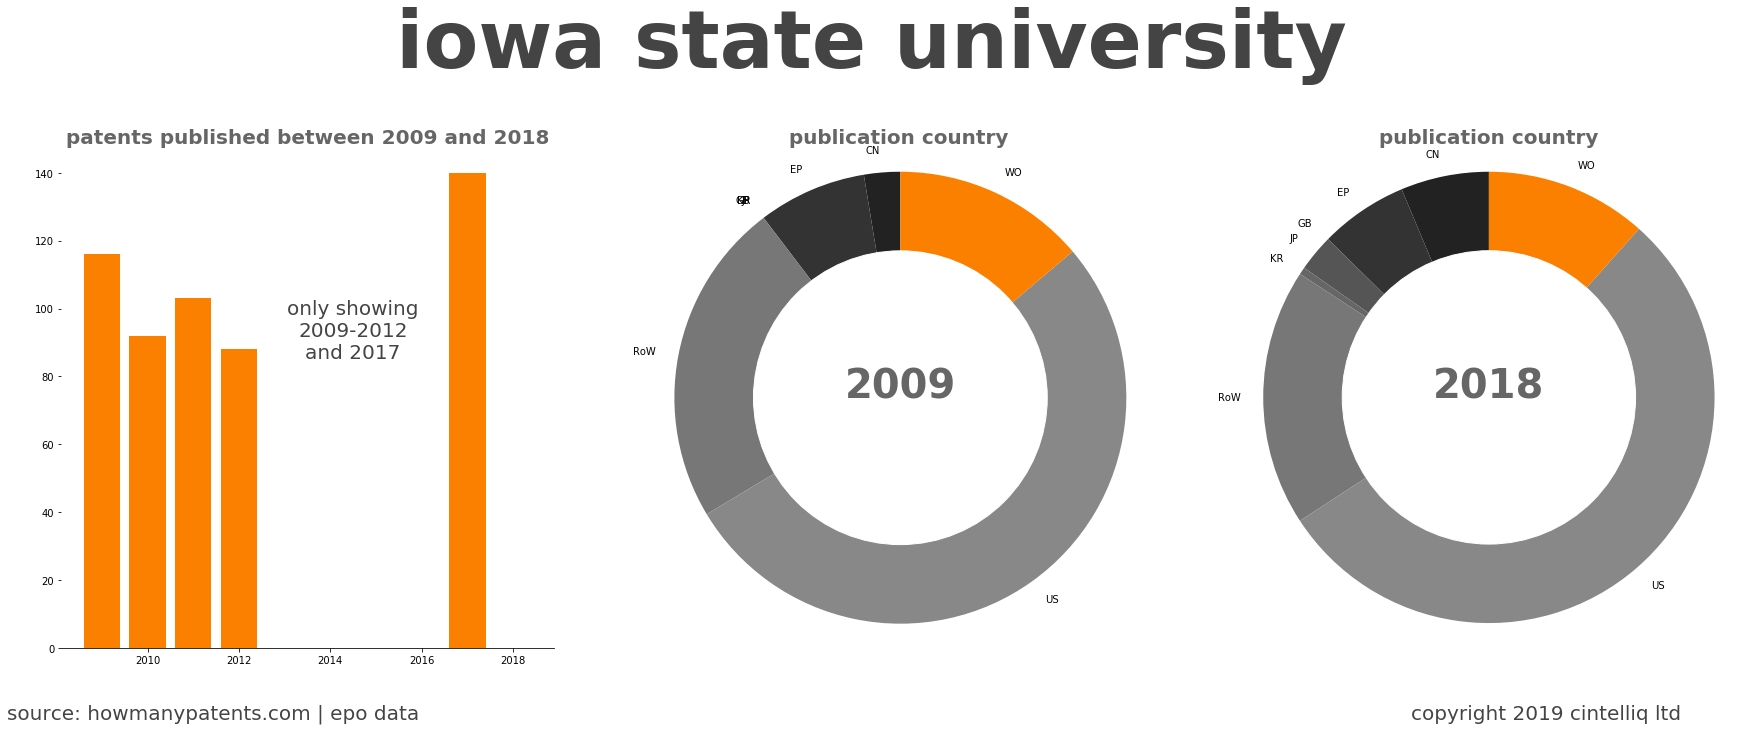 summary of patents for Iowa State University